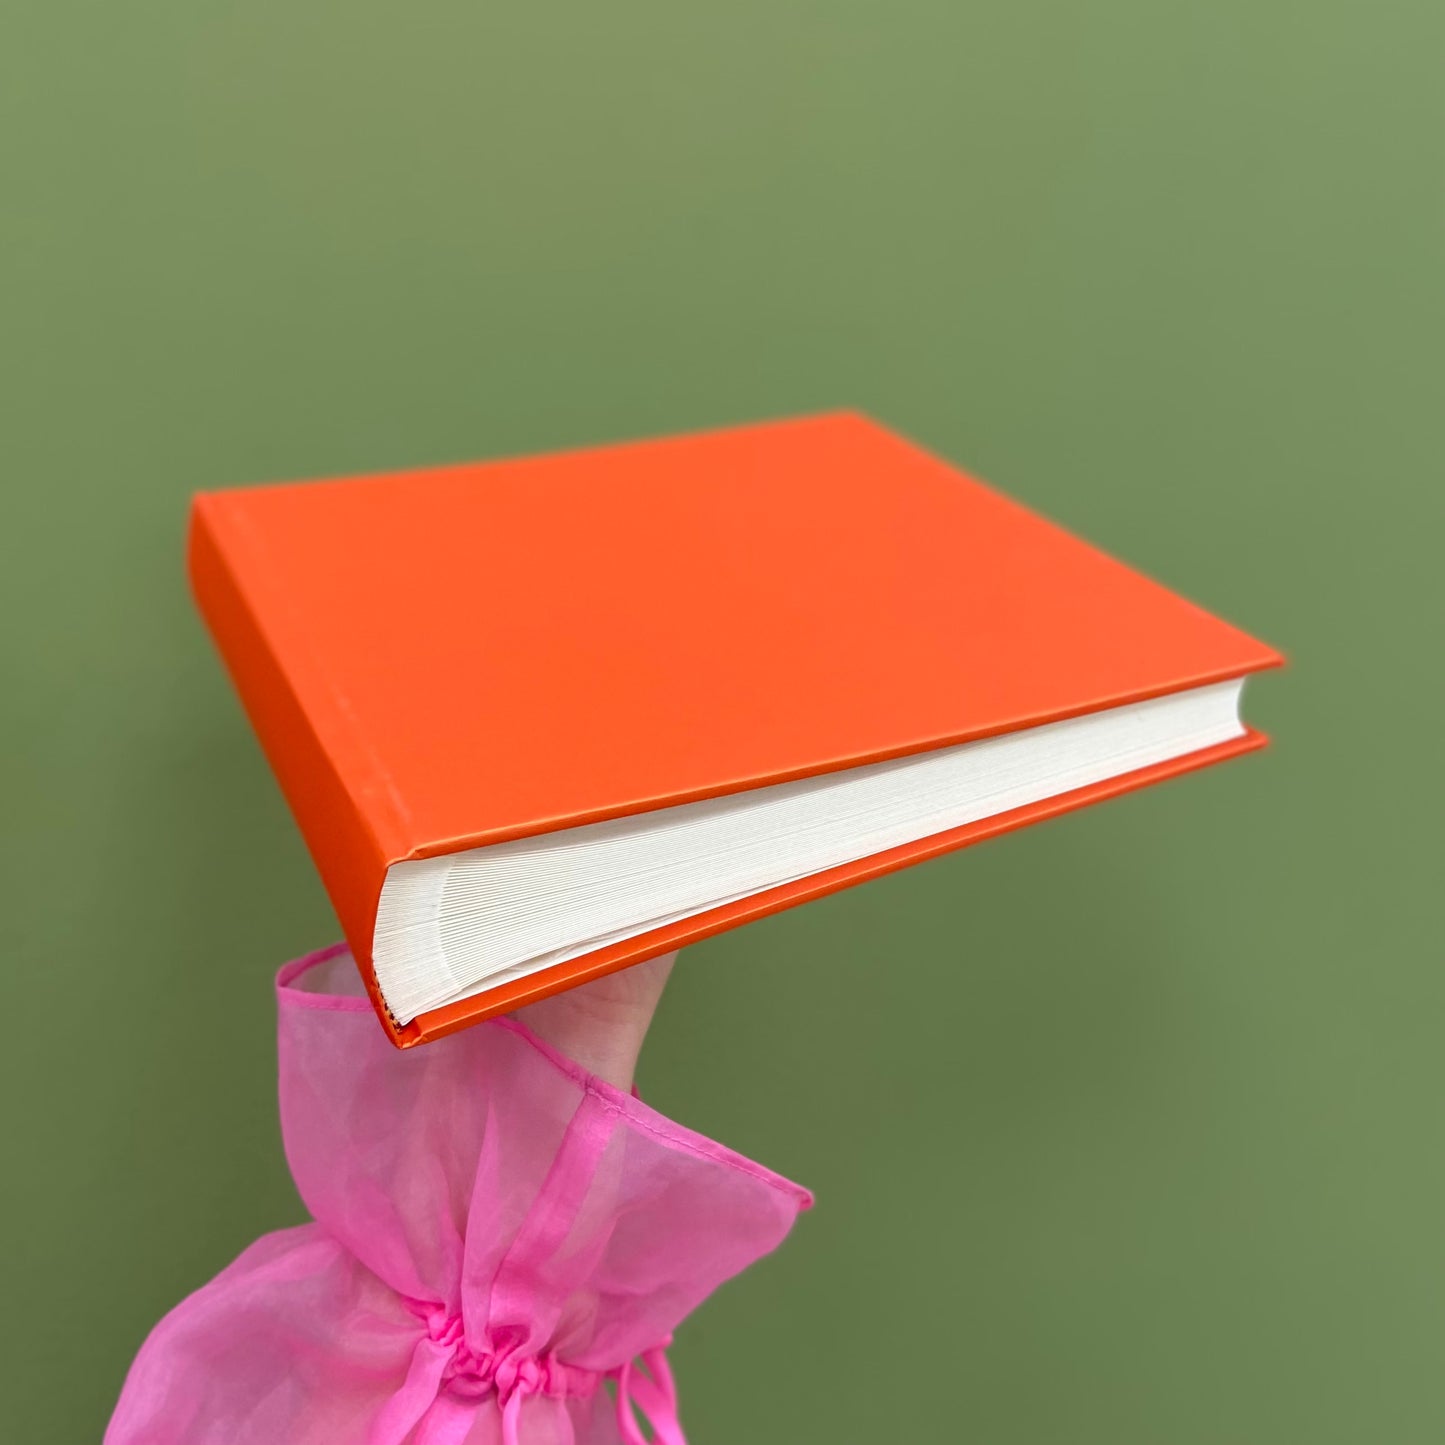 an orange wedding guest book is being held up so you can see the traditional binding. the background is green